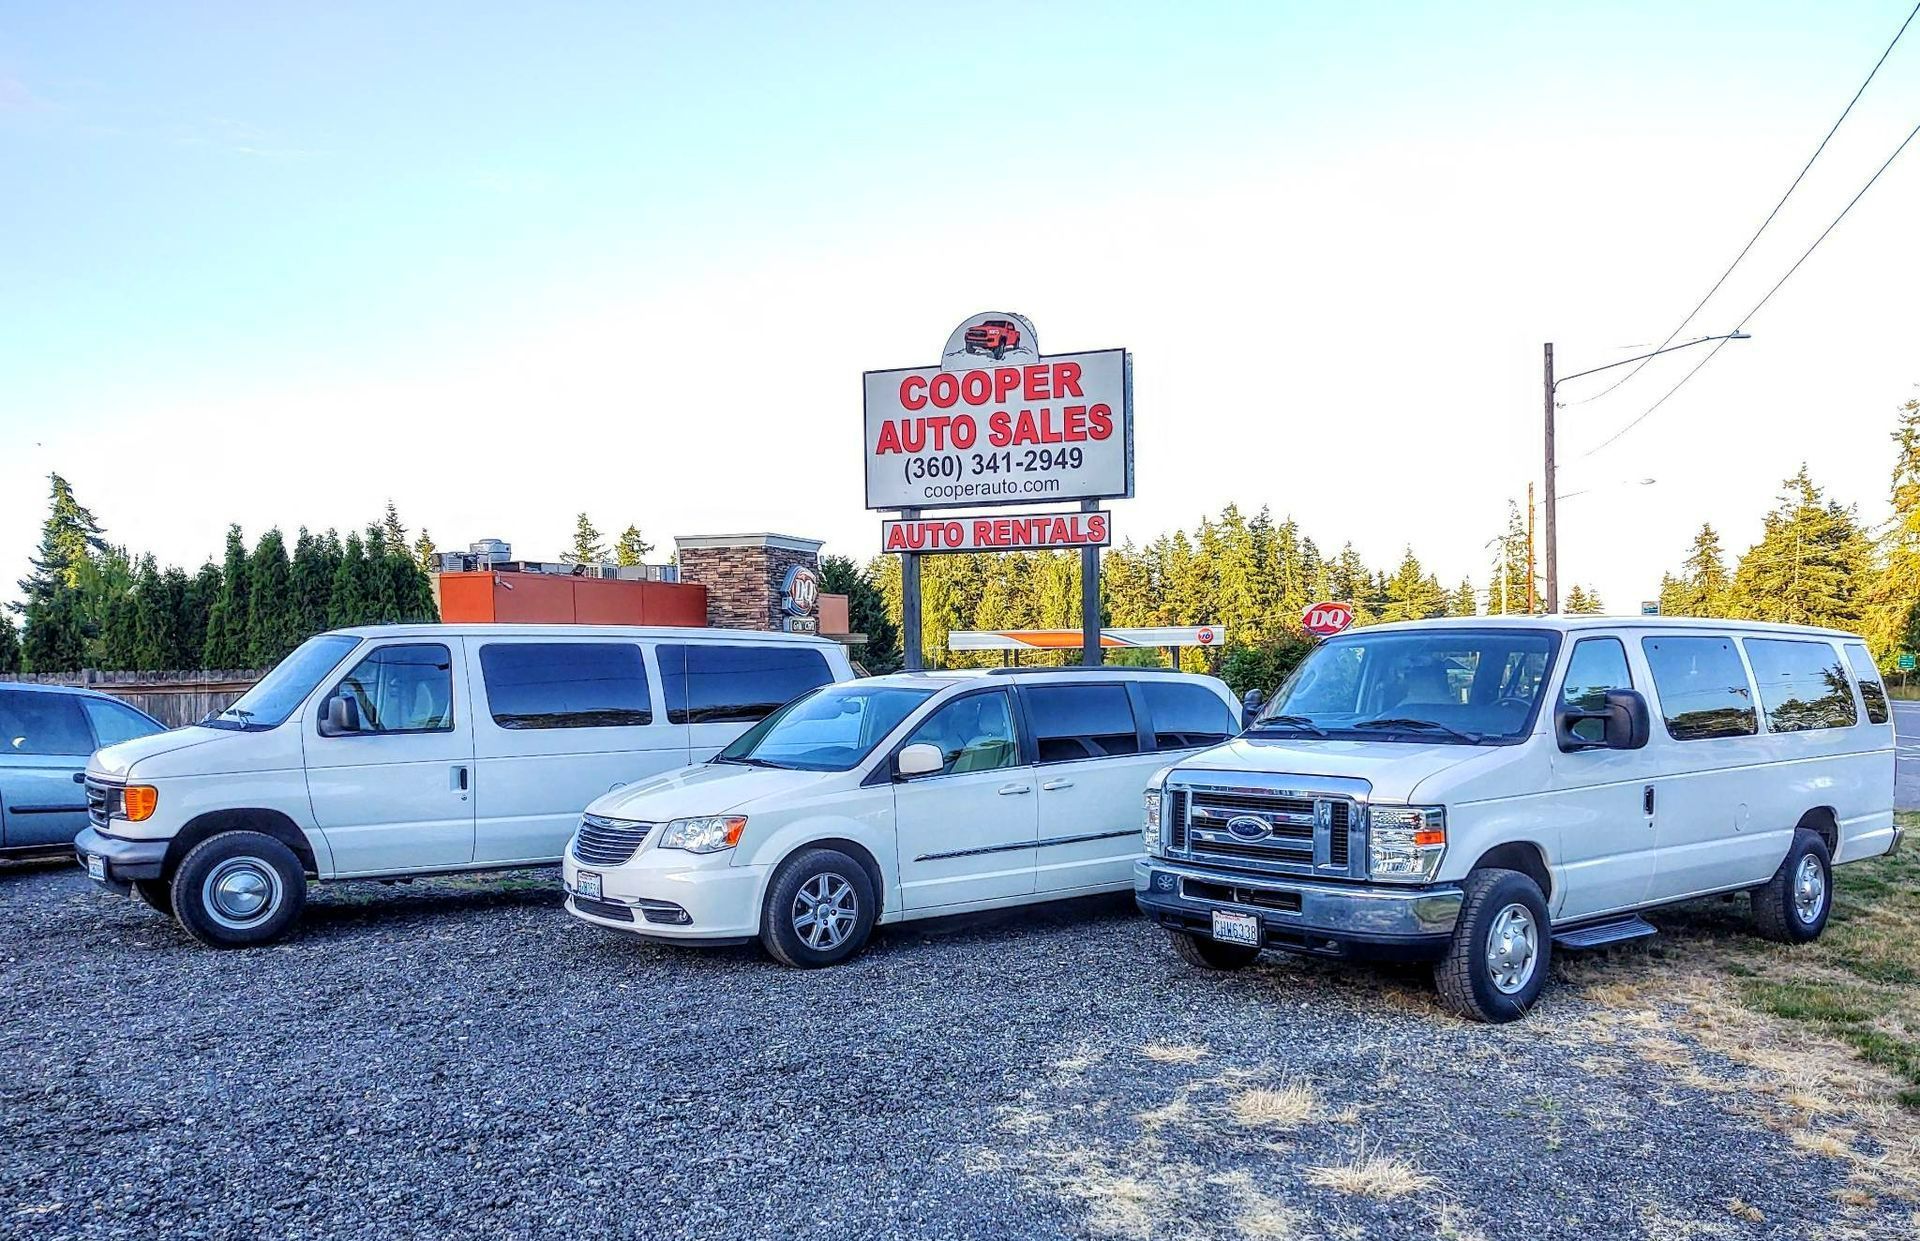 We buy, sell and consign cars, trucks, suvs and RVs.